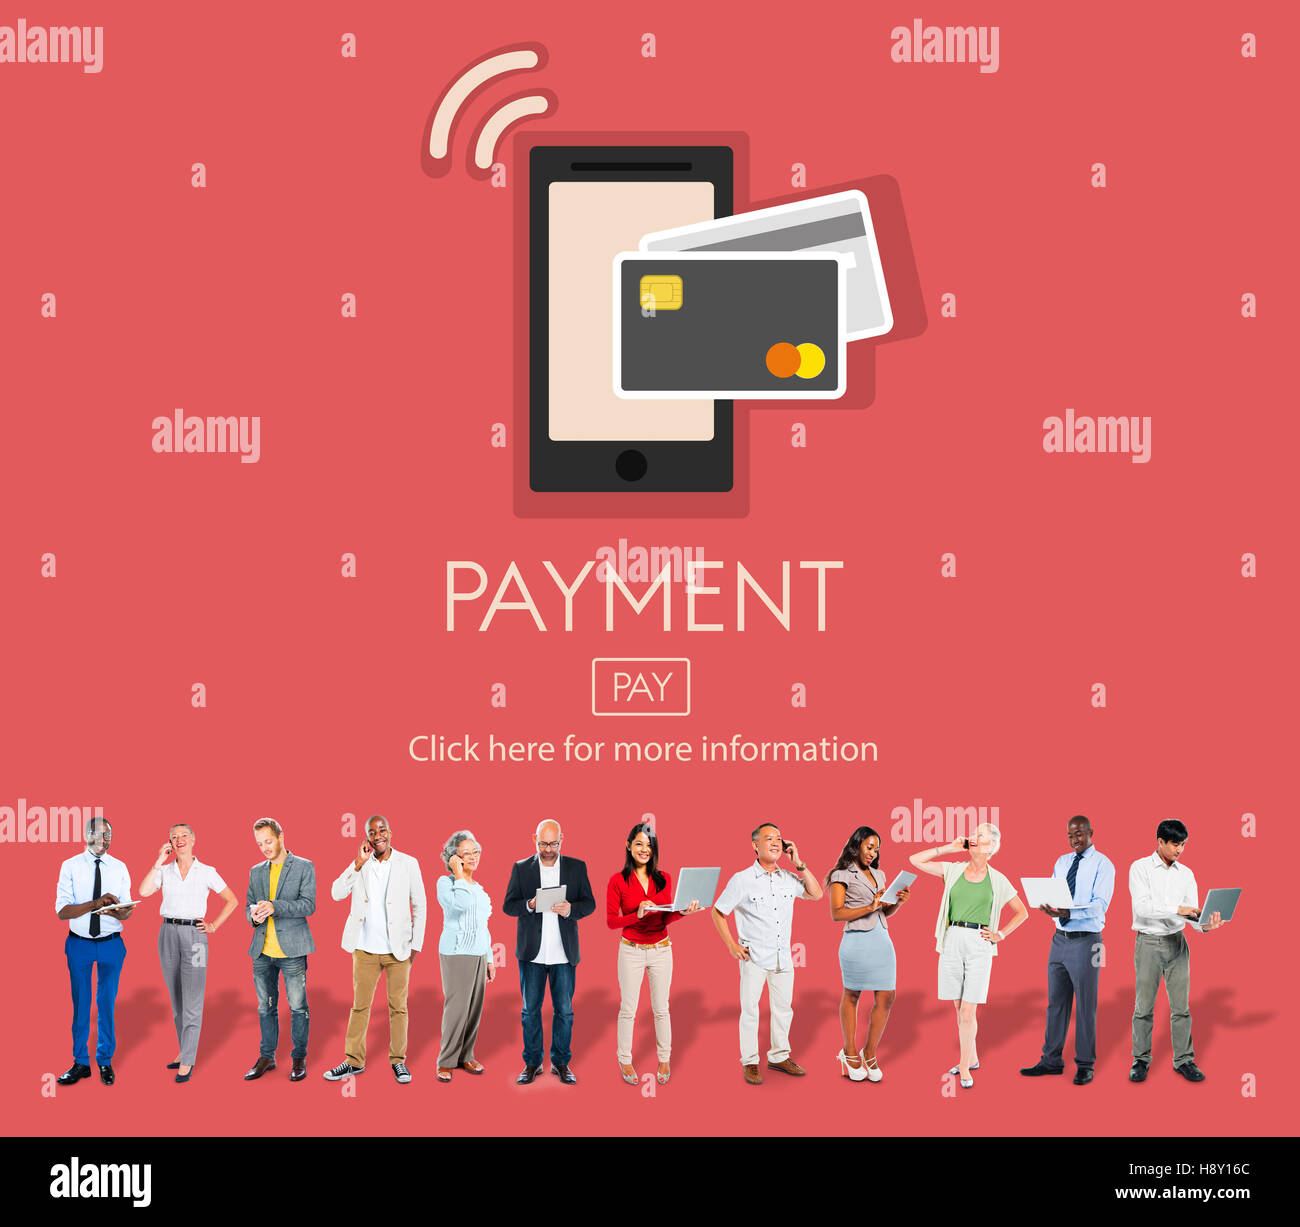 Payment Pay Balance Banking Credit Customer Concept Stock Photo